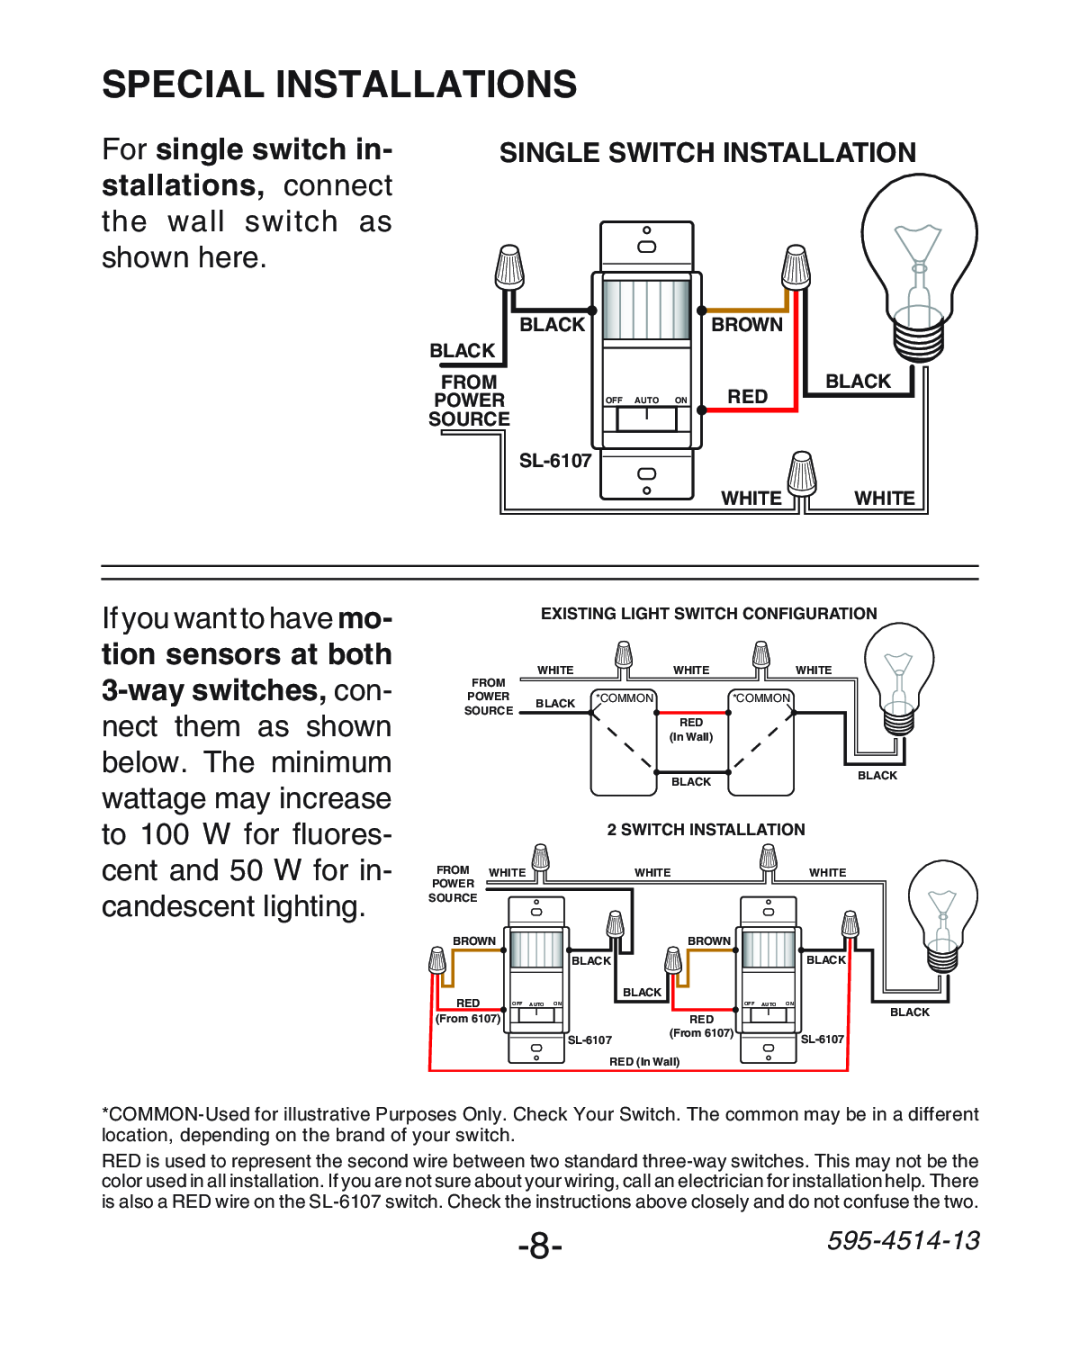 Heath Zenith manual Special Installations, For single switch in, 8-595-4514-13, Black Black From, SOURCE SL-6107, White 